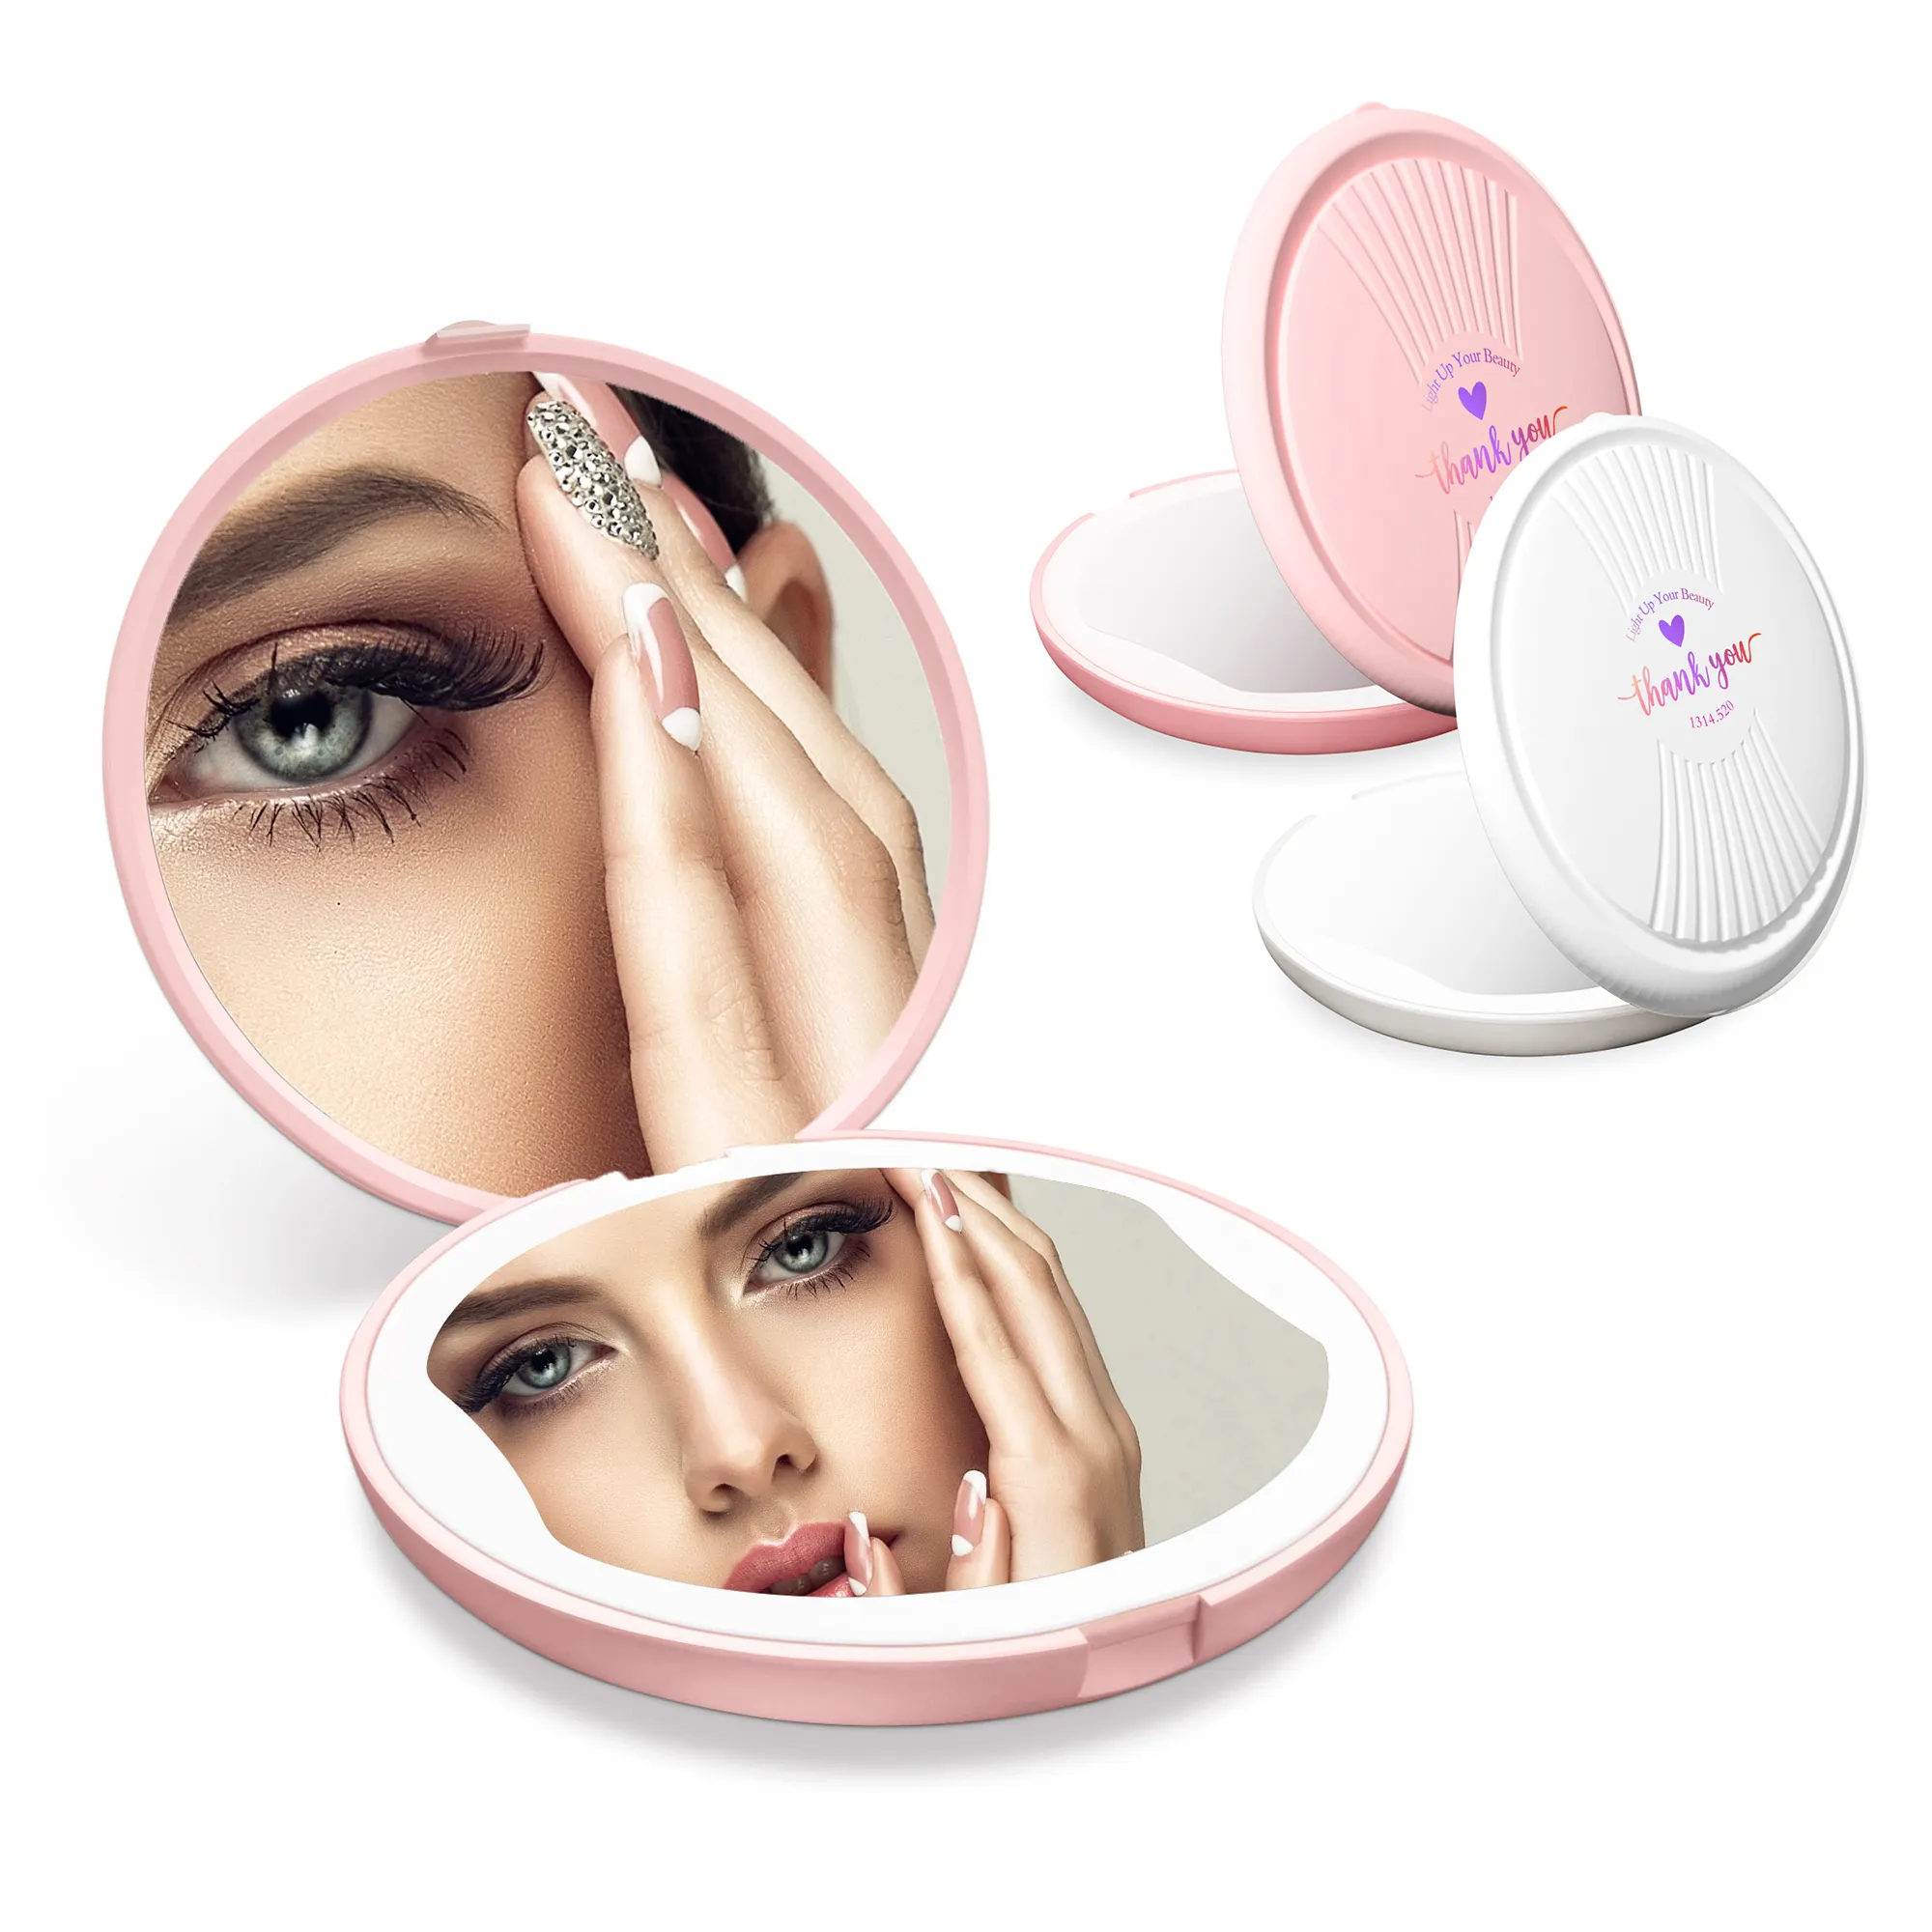 Beauty Mini Travel Lighted Small Double Sided Personal Hand Magnifying Portable Makeup Cosmetic Purse Pocket Led compact Mirror